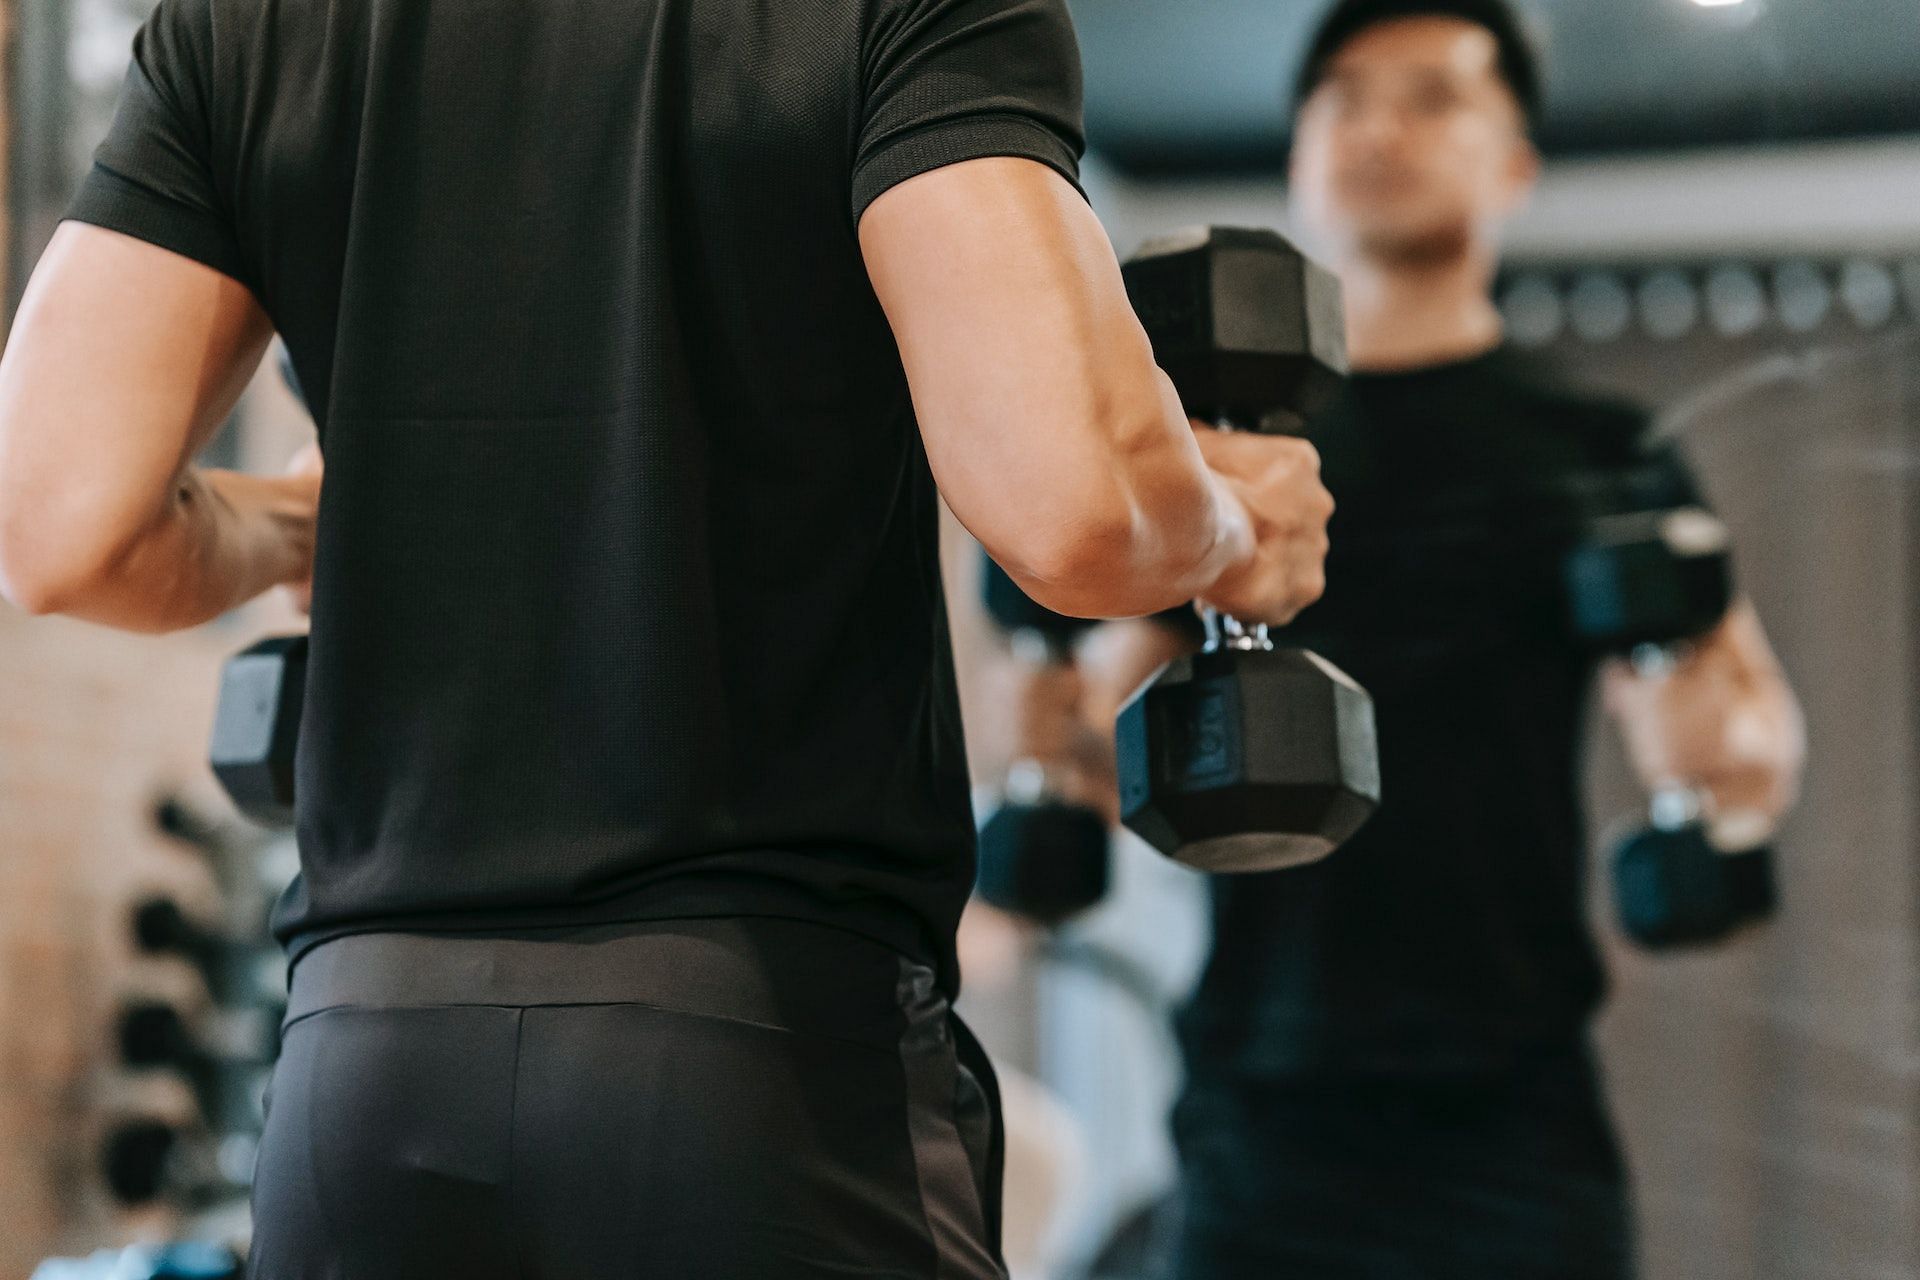 Dumbbell overhead press helps build shoulder size and strength. (Photo via Pexels/Andres Ayrton)